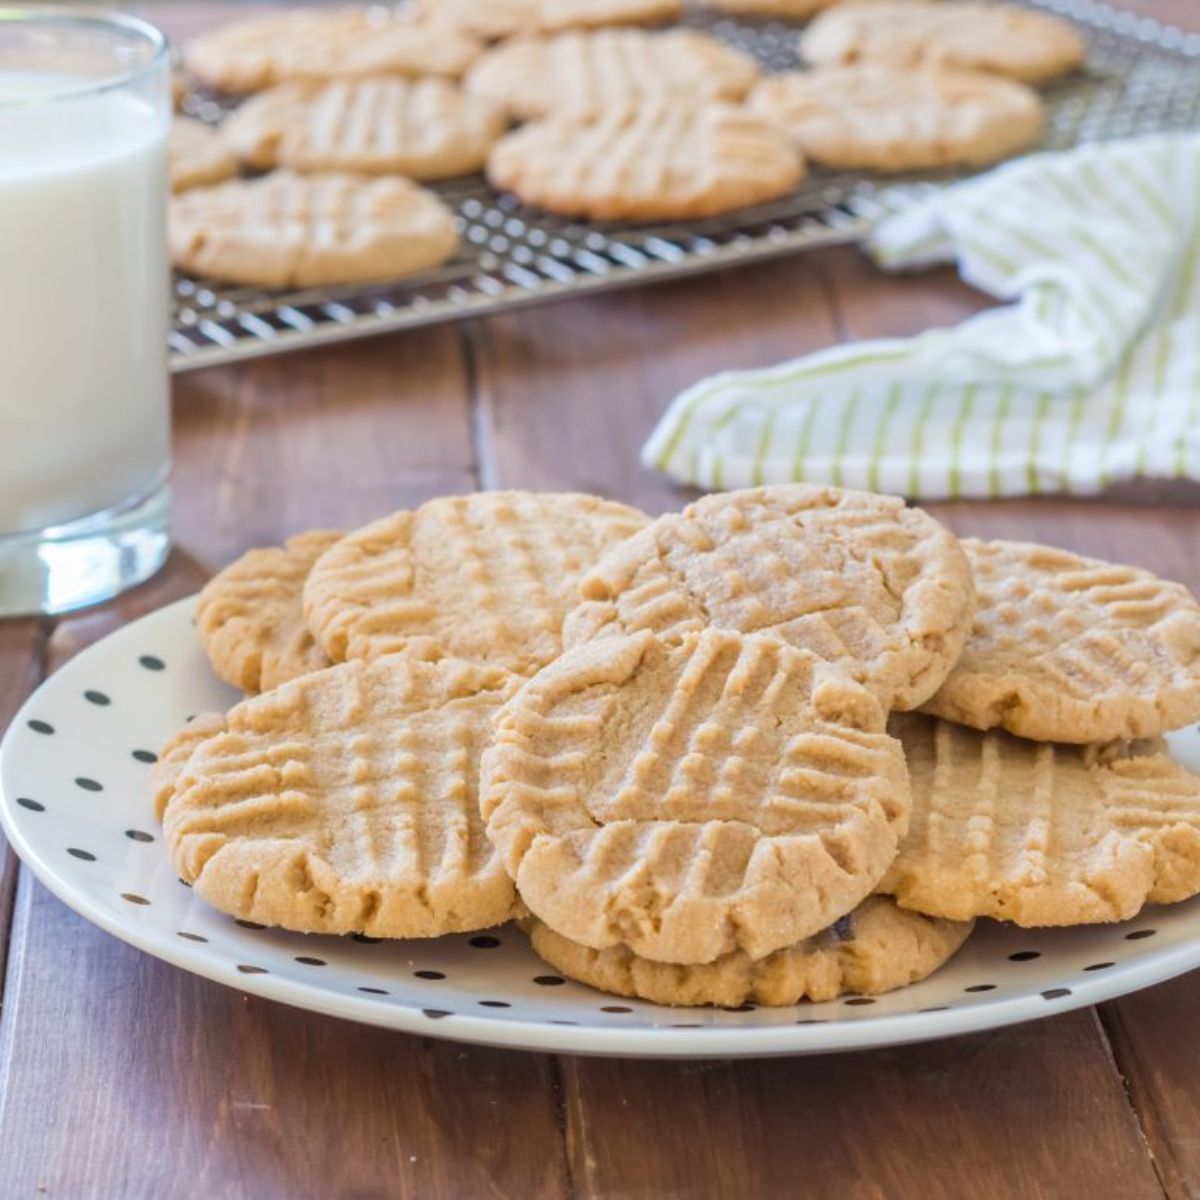 Crunchy Peanut Butter Cookies on a plate.